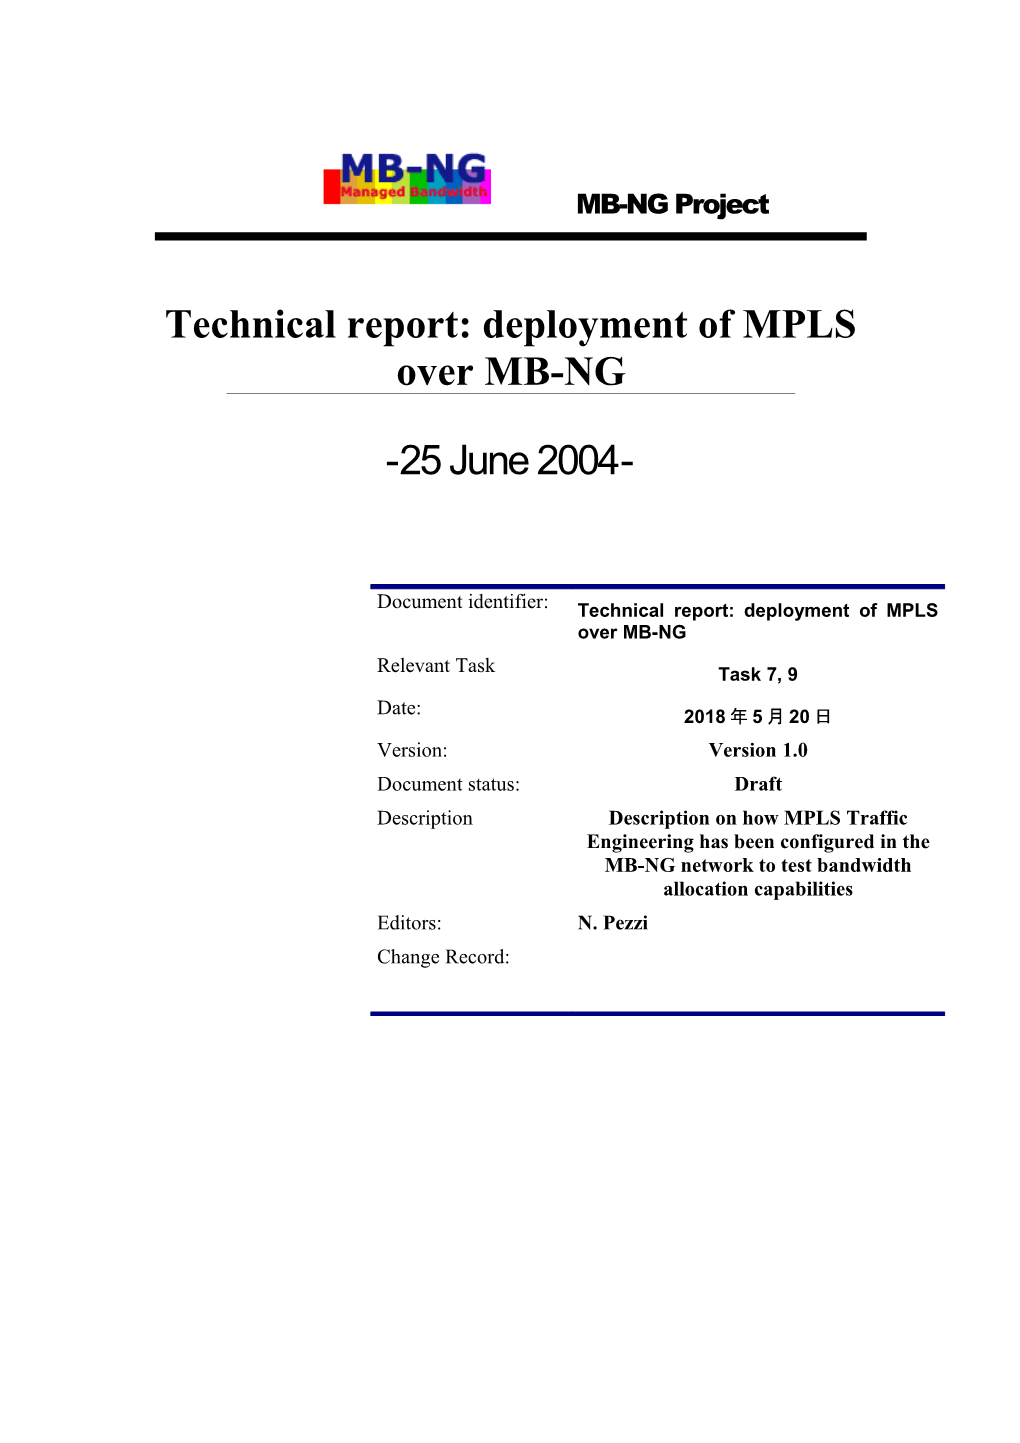 Technical Report: Deployment of MPLS Over MB-NG